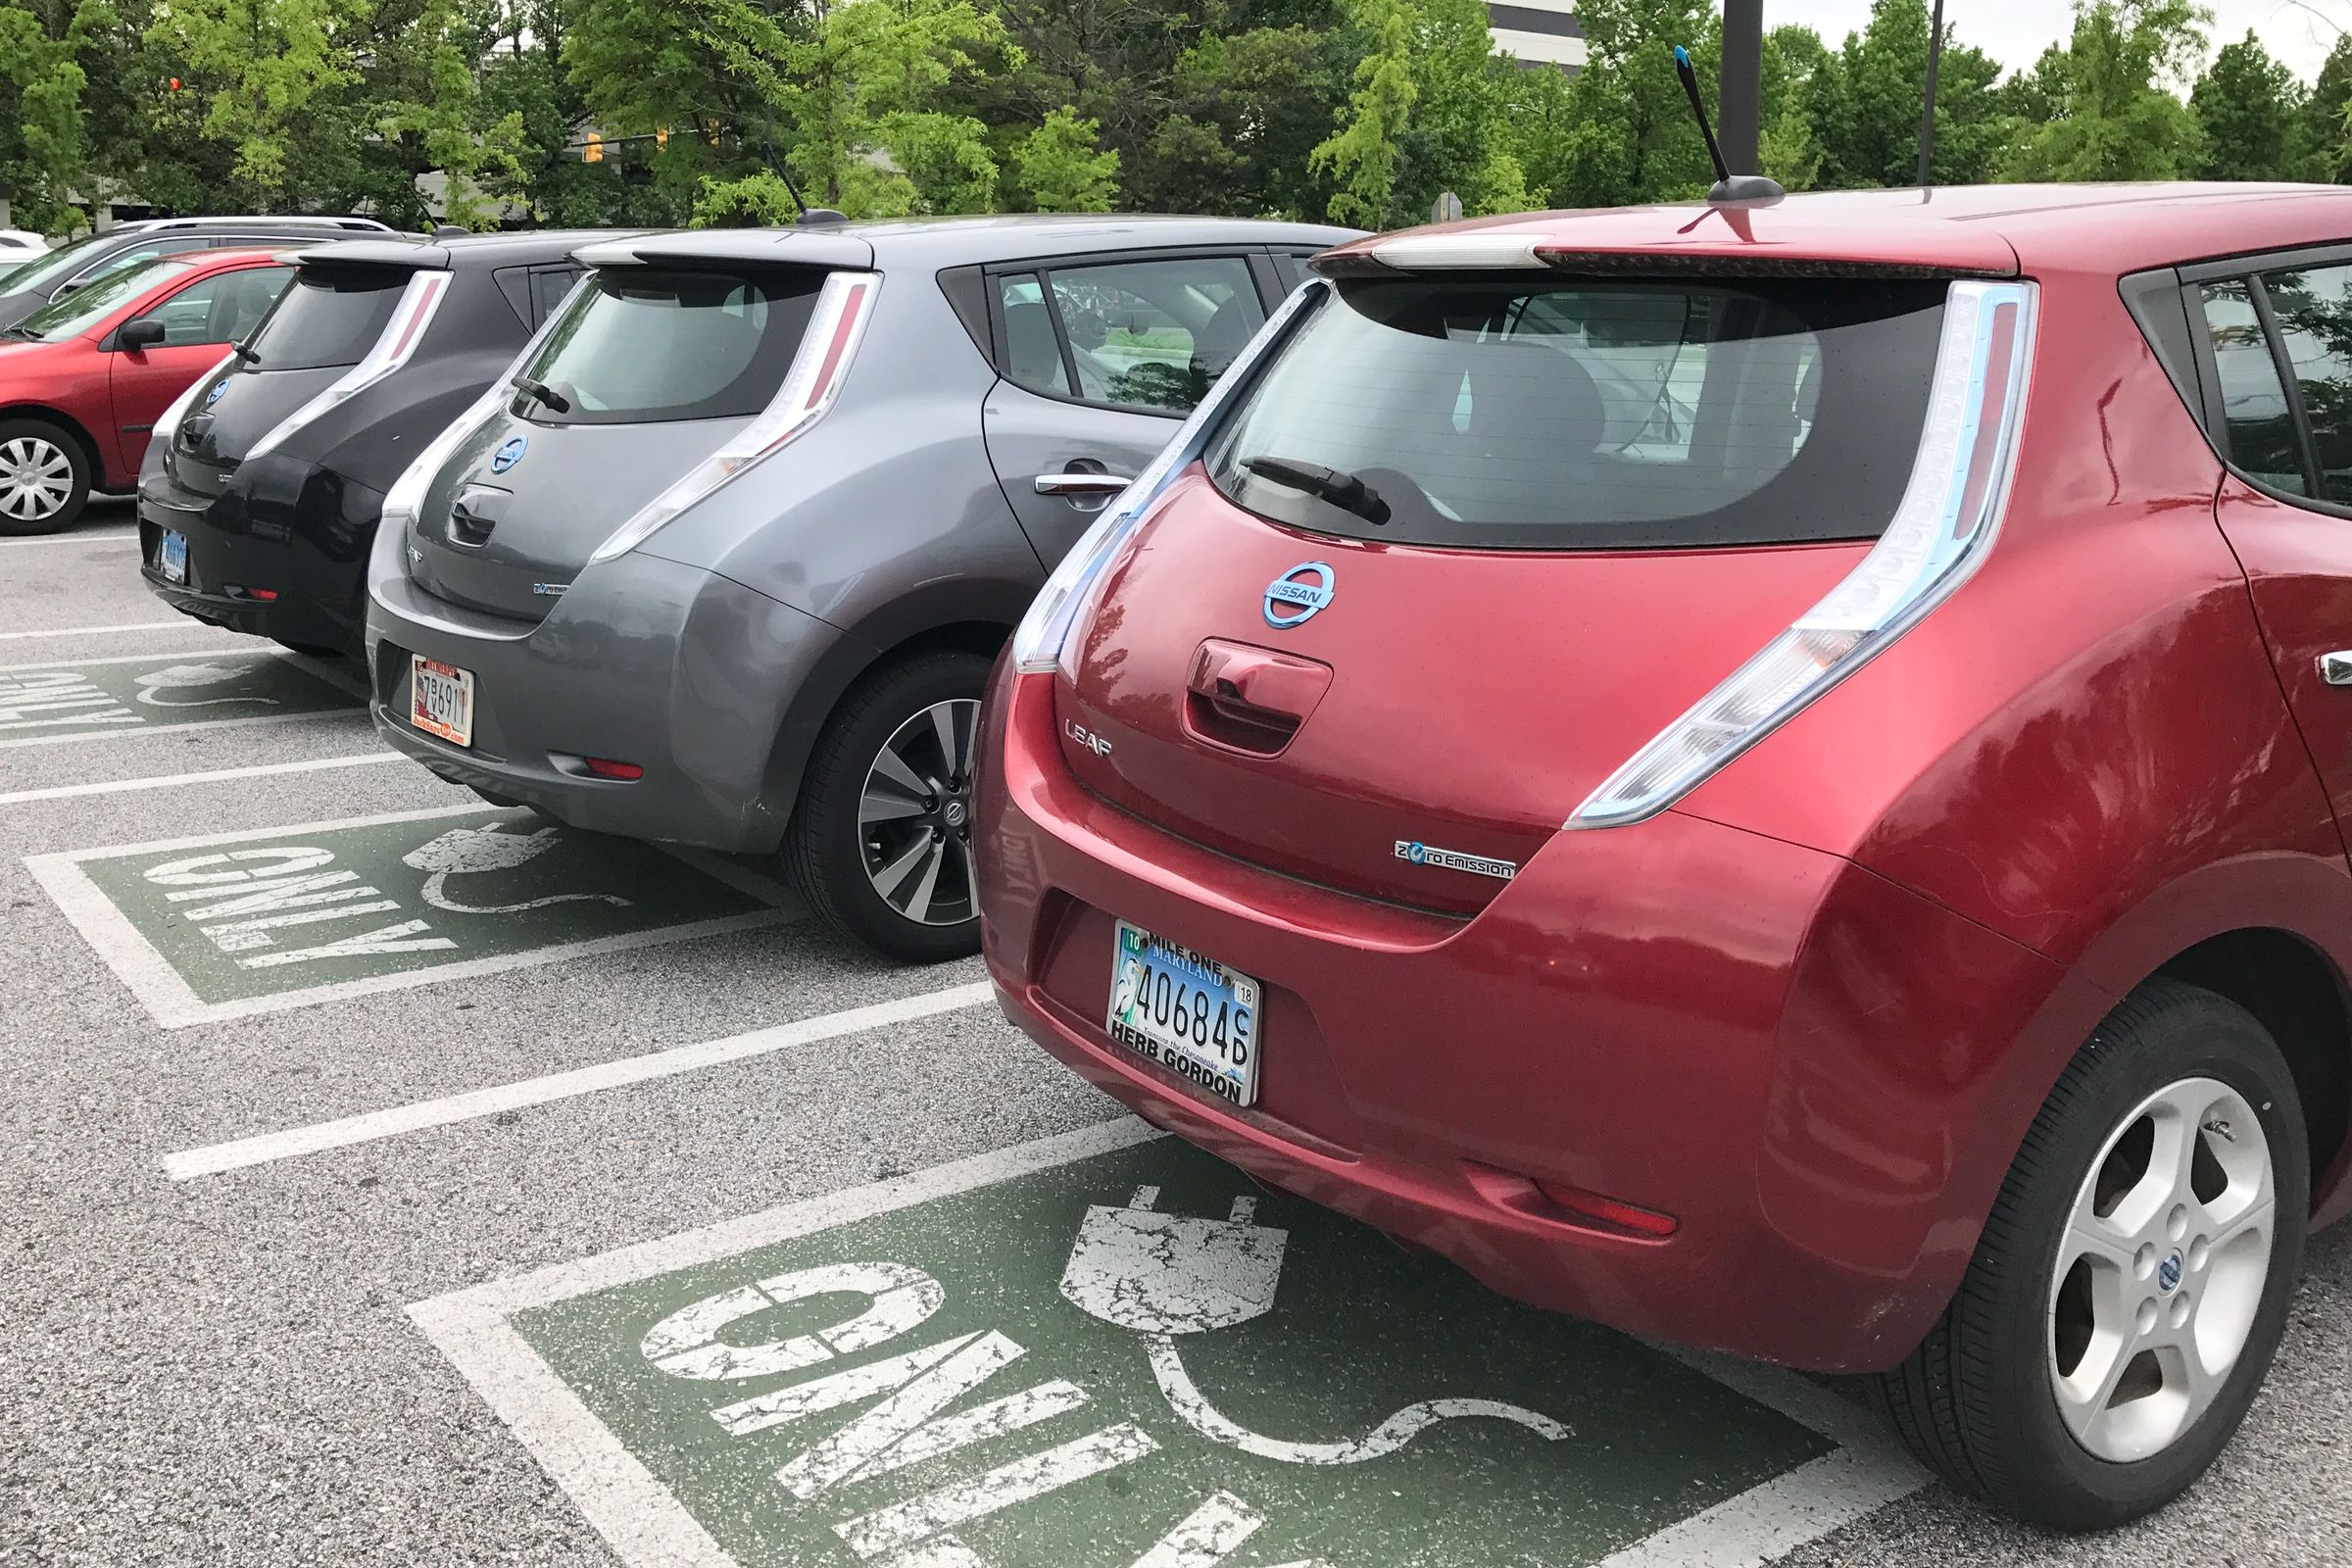 A Leaf charging lineup in 2017. Today, you’re more likely to see a line of Tesla Model 3s or Ys.